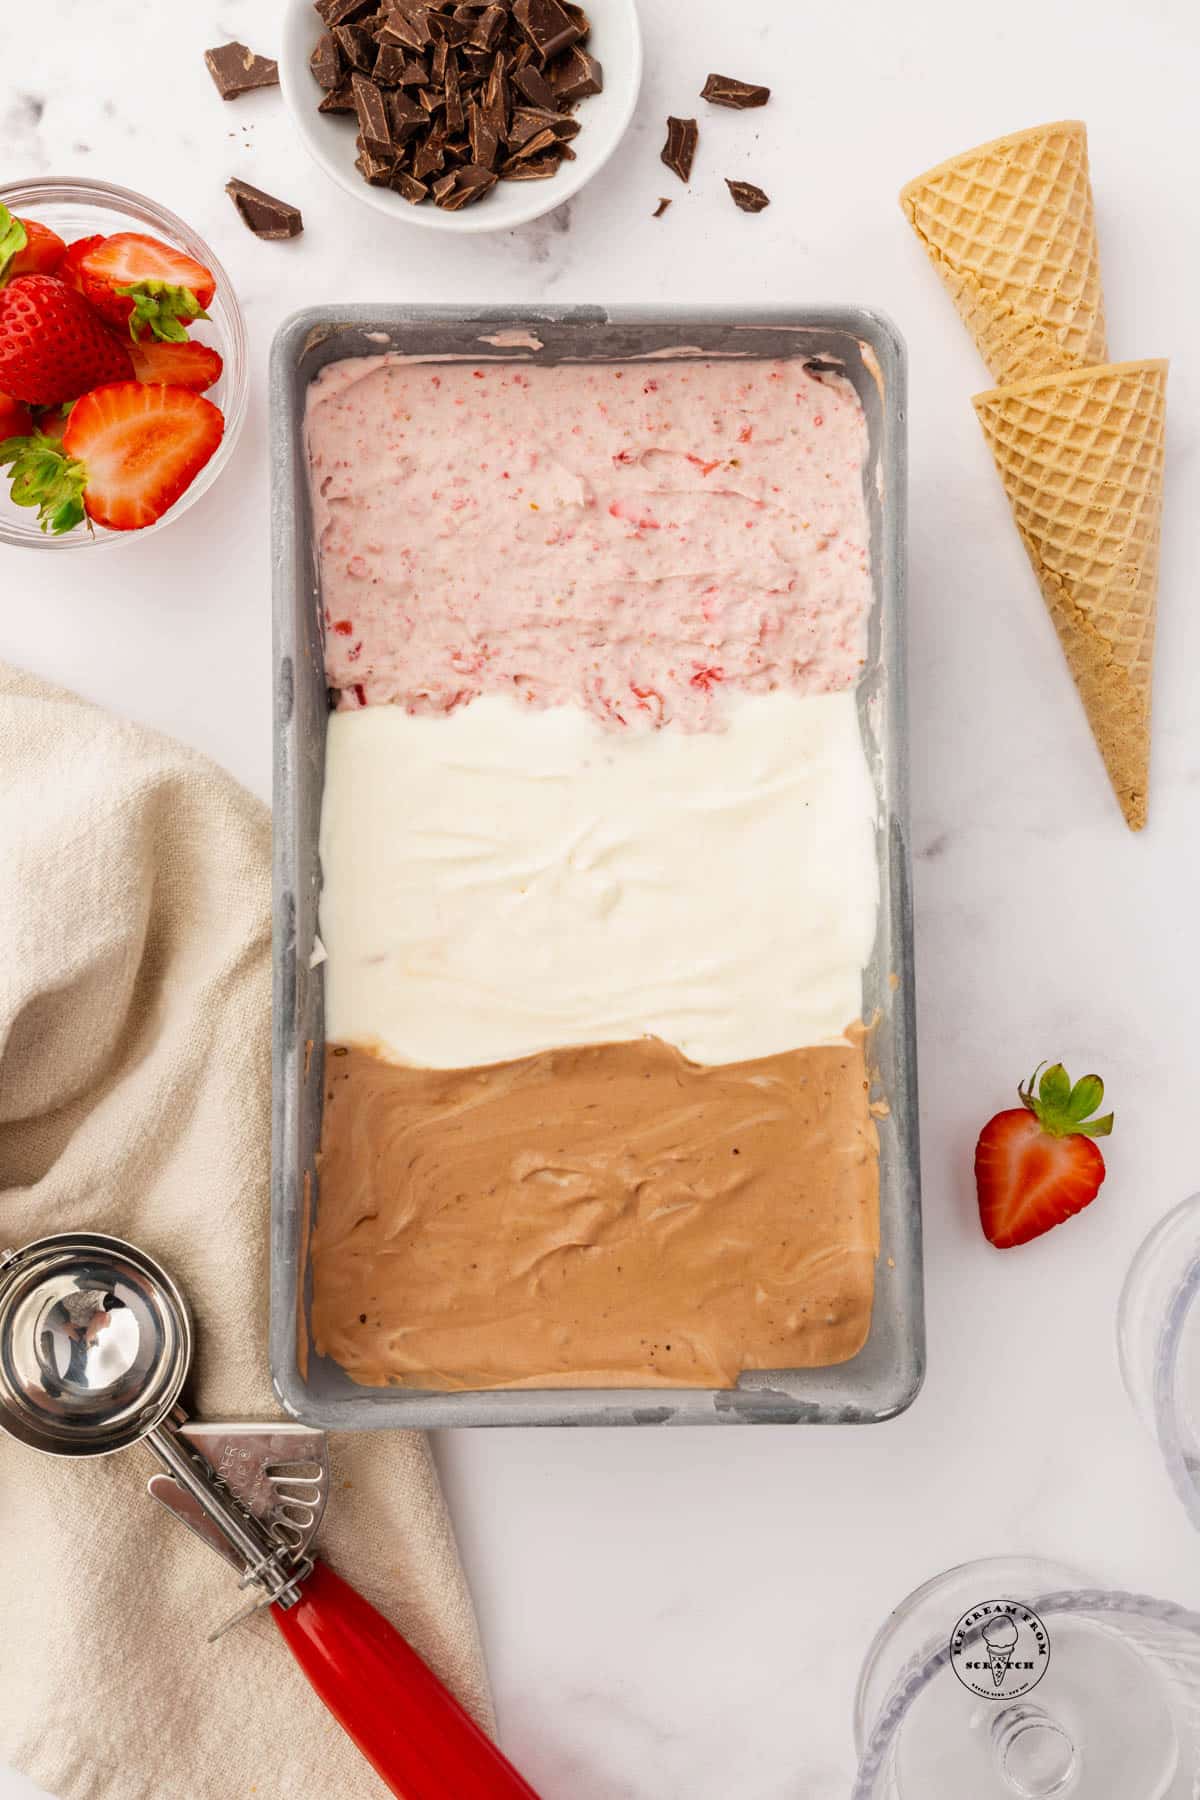 Strawberry, vanilla, and chocolate ice cream, layered into a metal loaf pan, viewed from above. Next to the pan of ice cream are two sugar cones, a bowl of strawberries, a bowl of chocolate chunks, and a red and silver ice cream scoop.